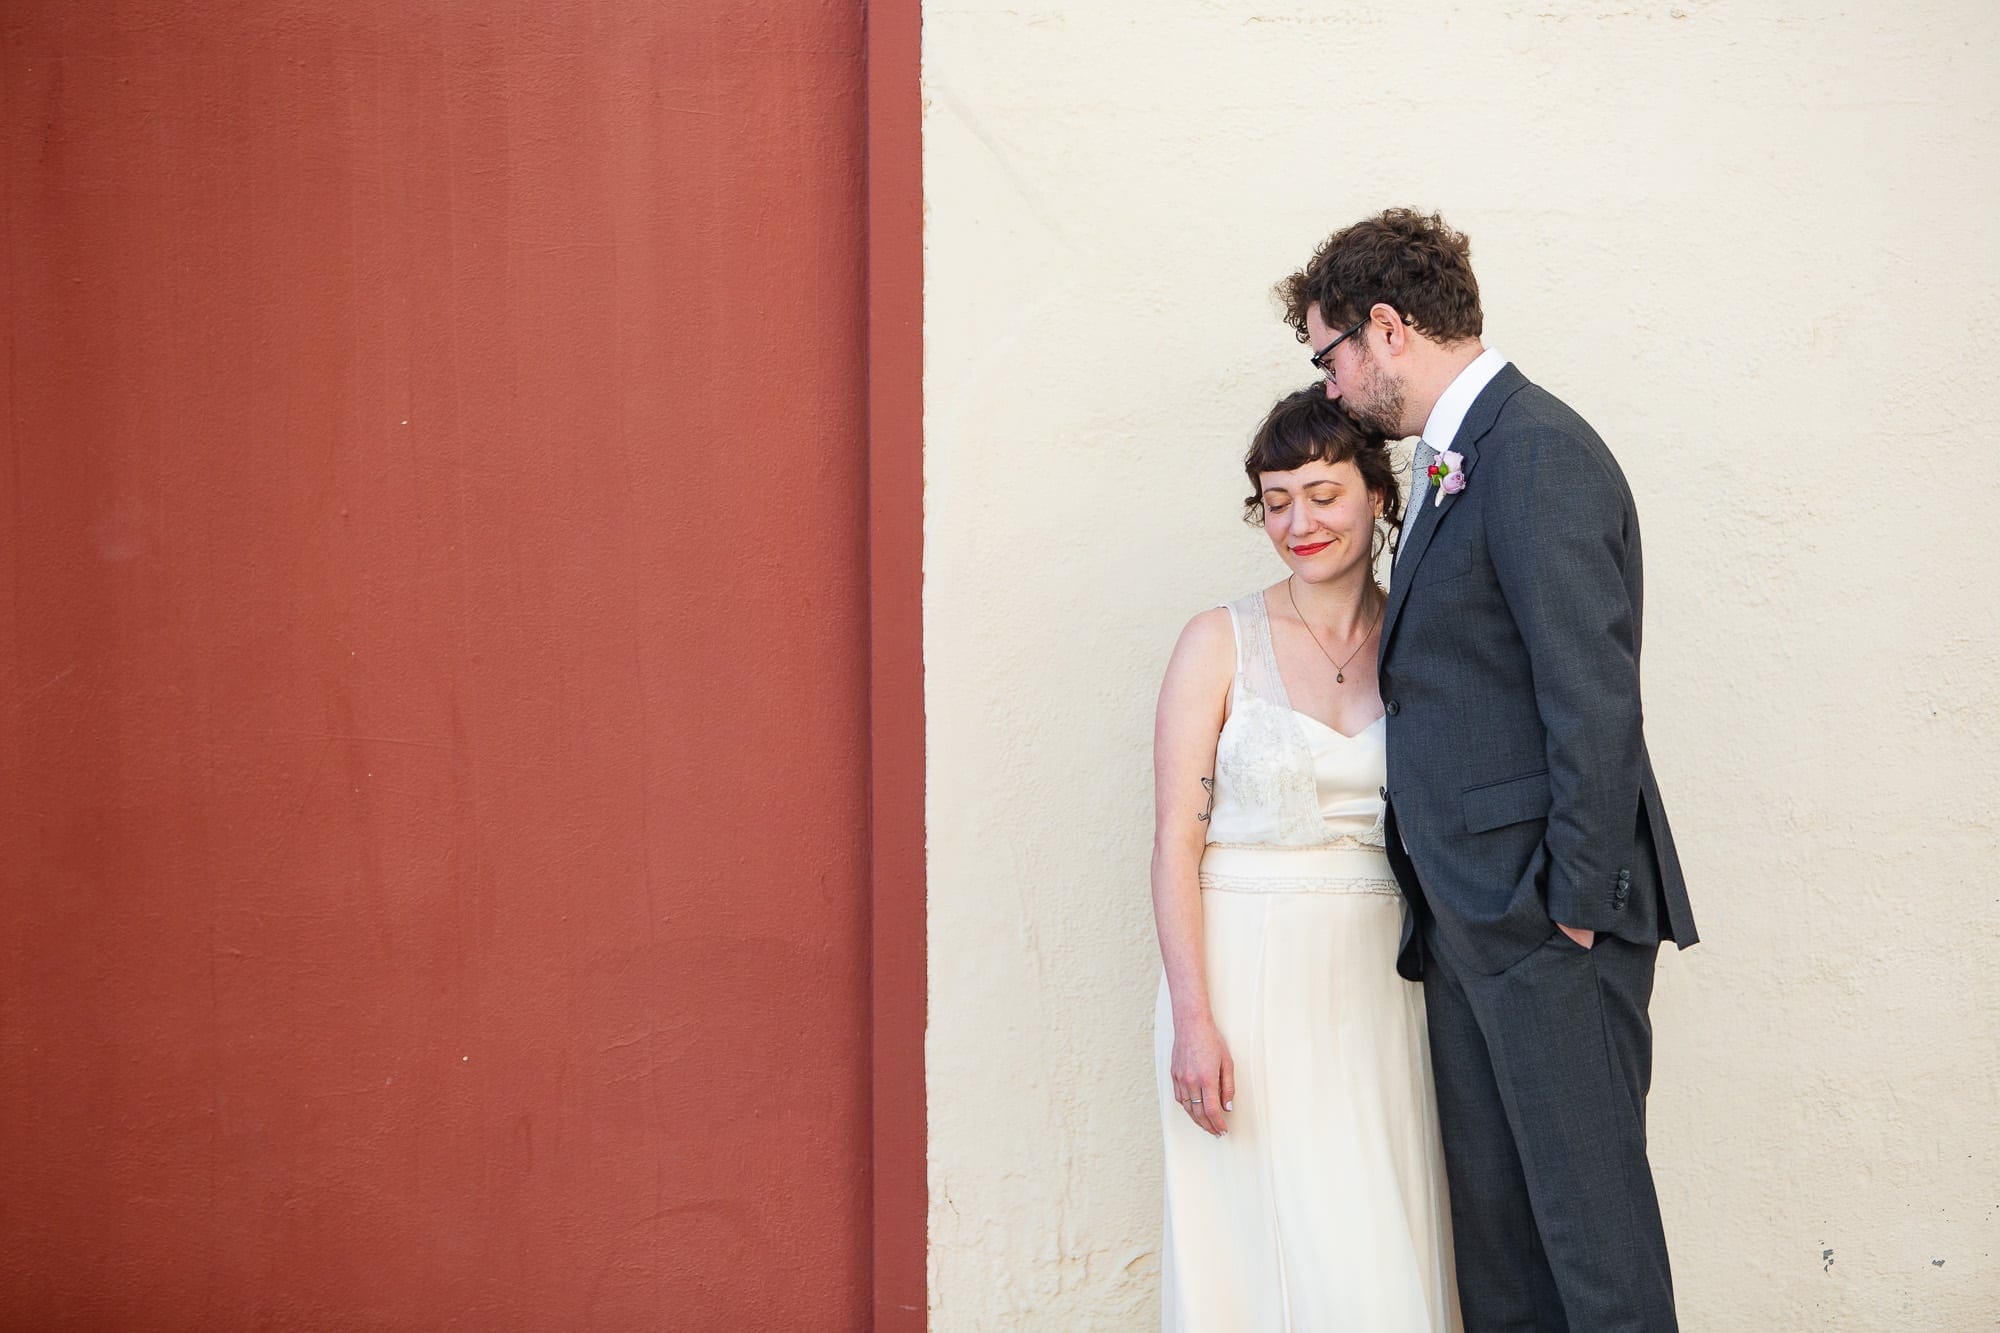 Modern bride and groom in front of an urban red and white wall before the wedding